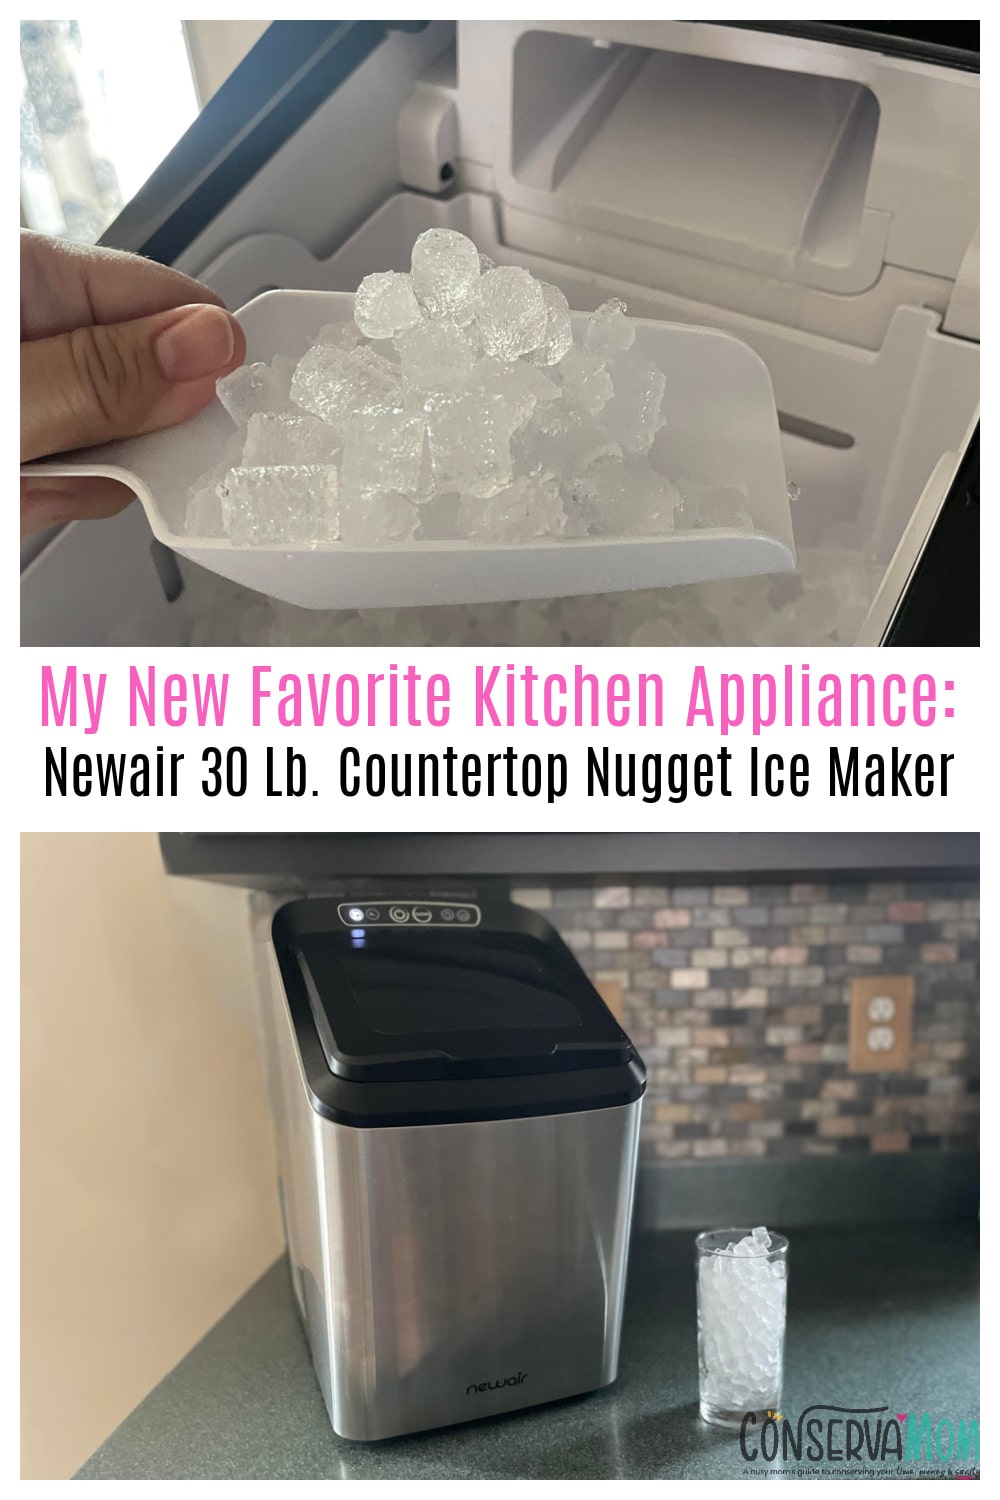 My New Favorite Kitchen Appliance_ Newair 30 Lb. Countertop Nugget Ice Maker